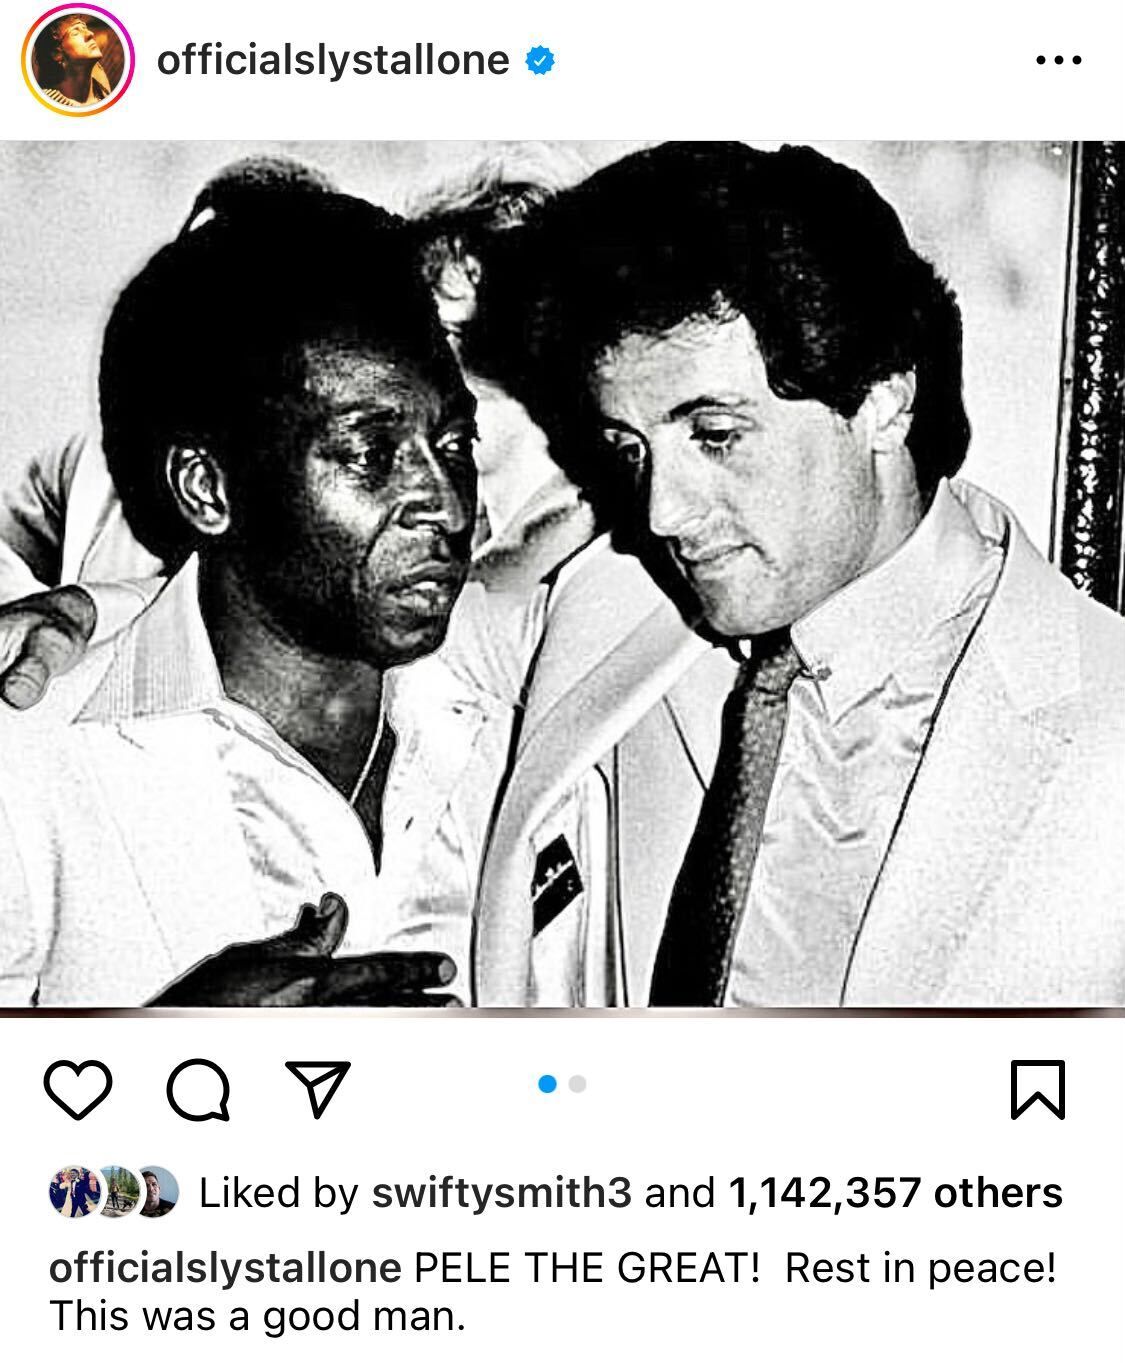 Stallone pays tribute to Pele on Instagram